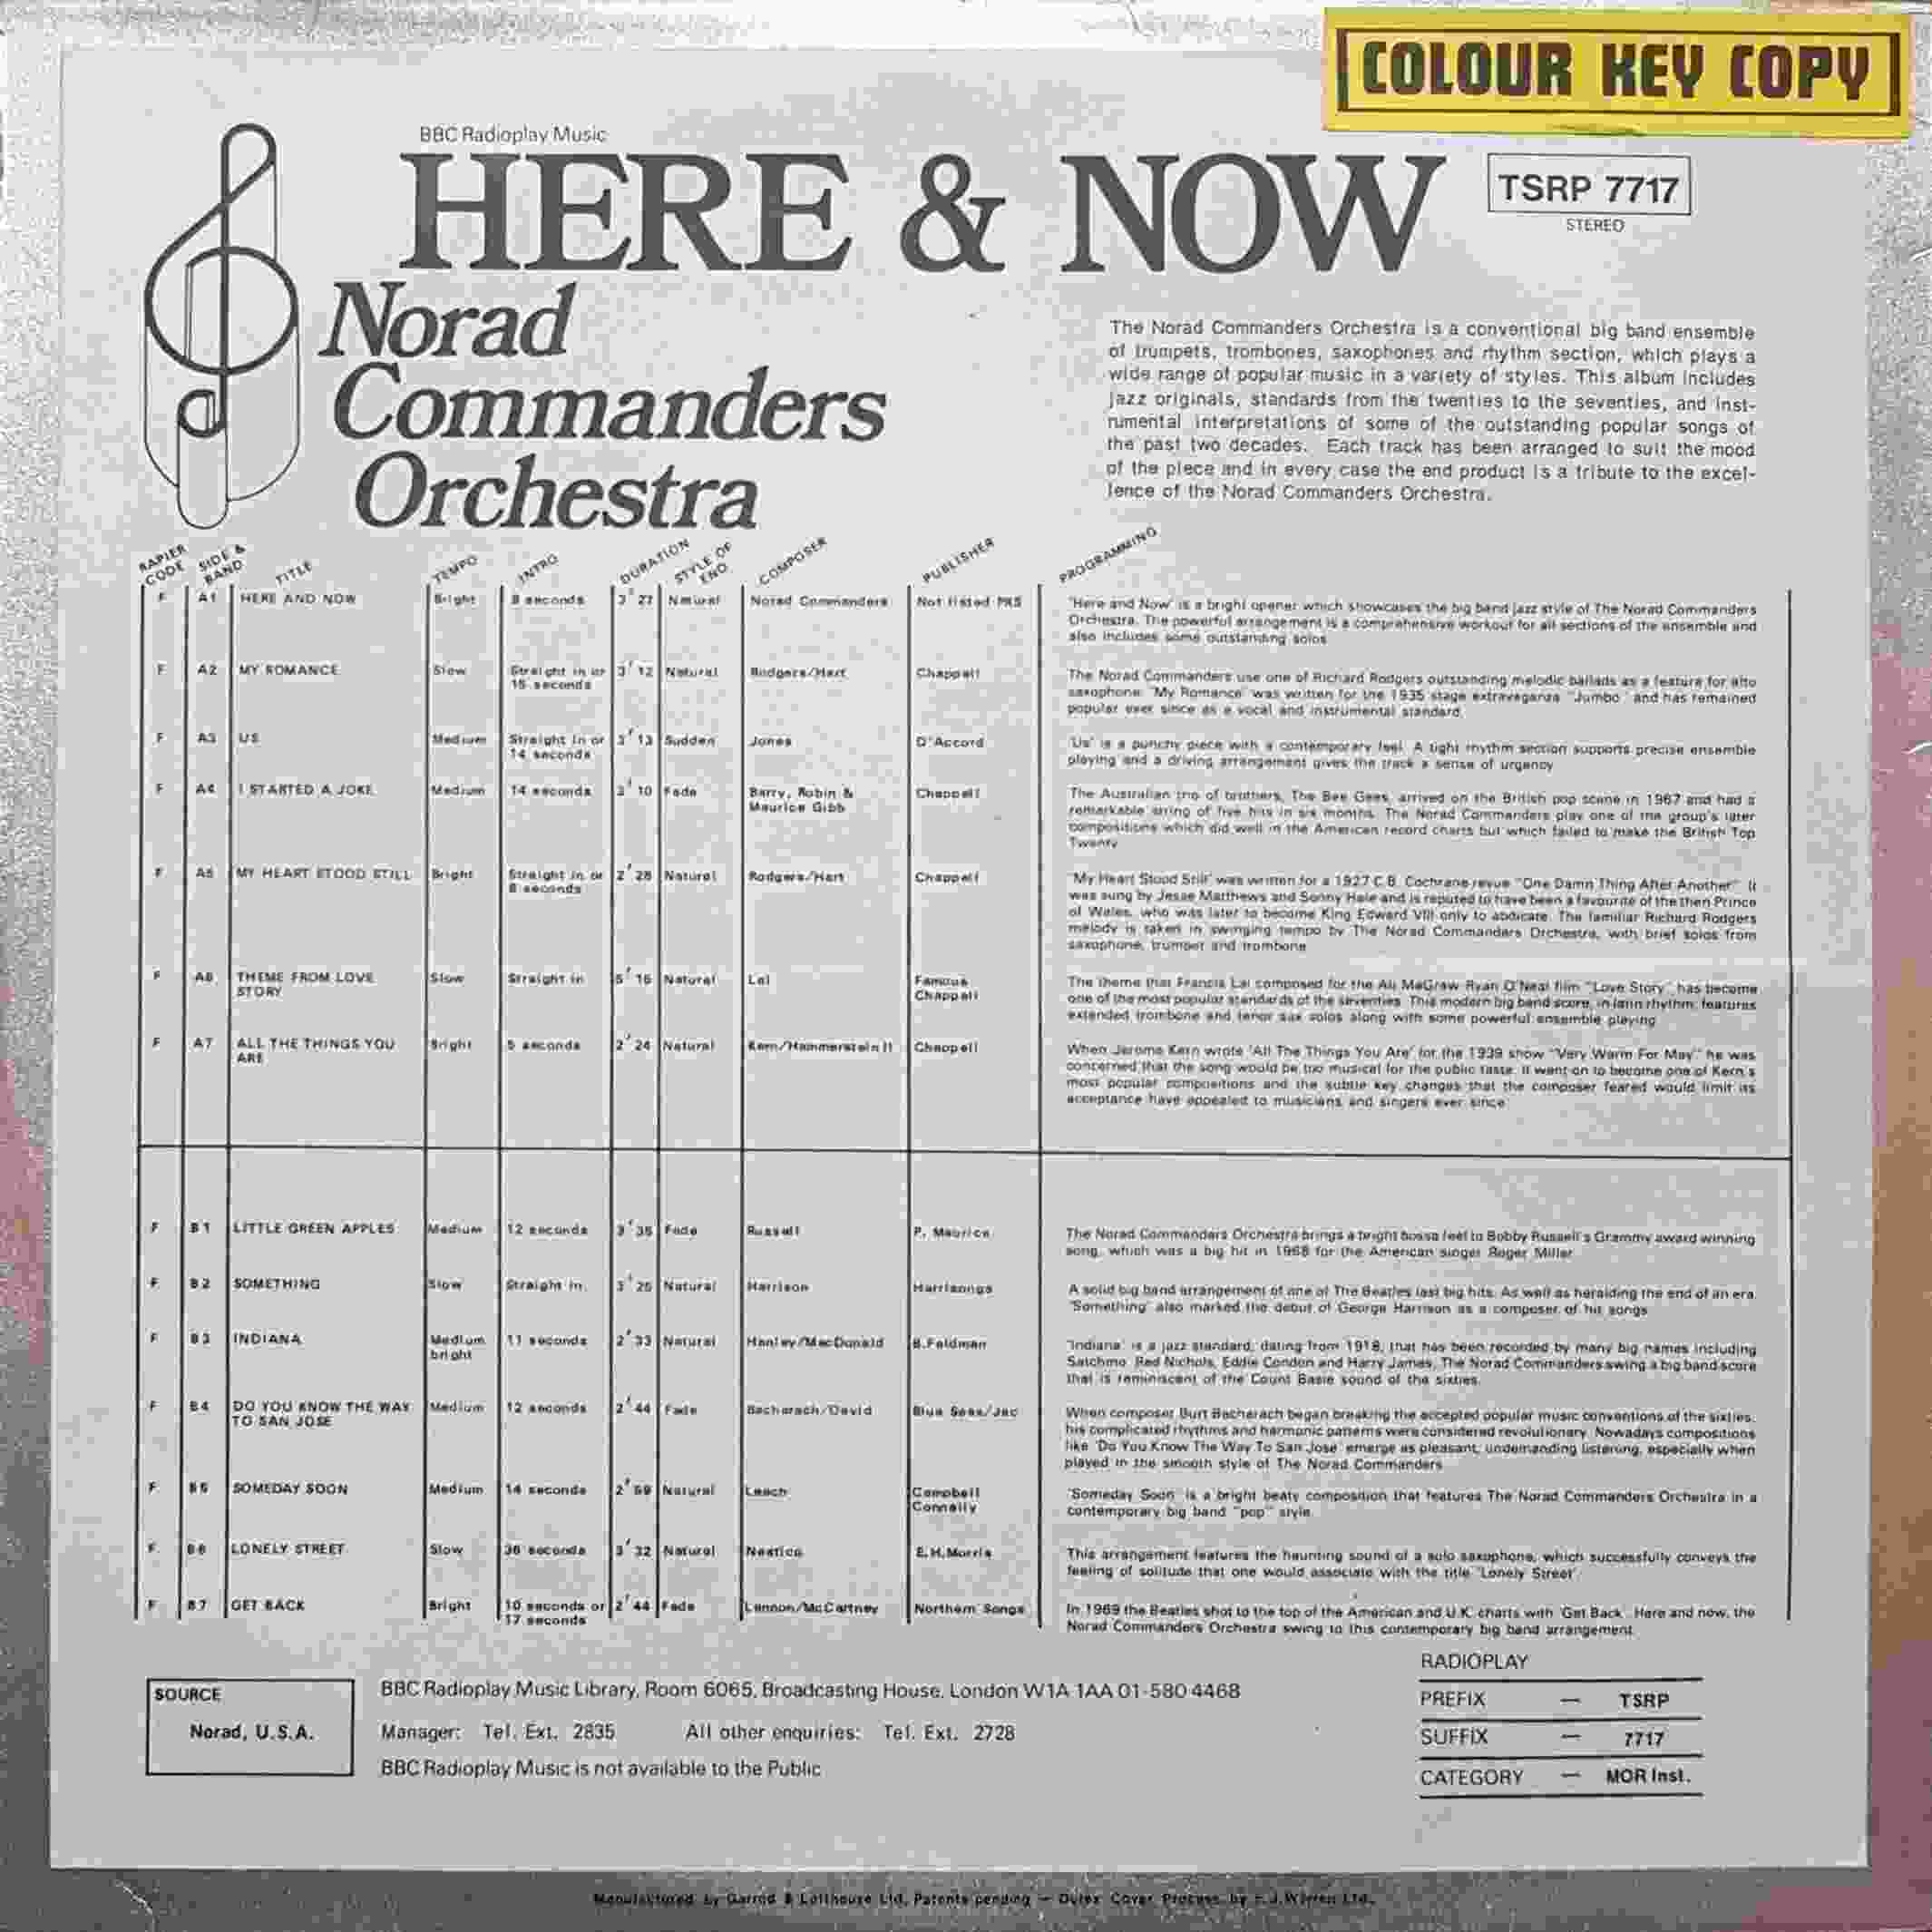 Picture of TSRP 7717 Here & now by artist Norad Commanders orchestra from the BBC records and Tapes library